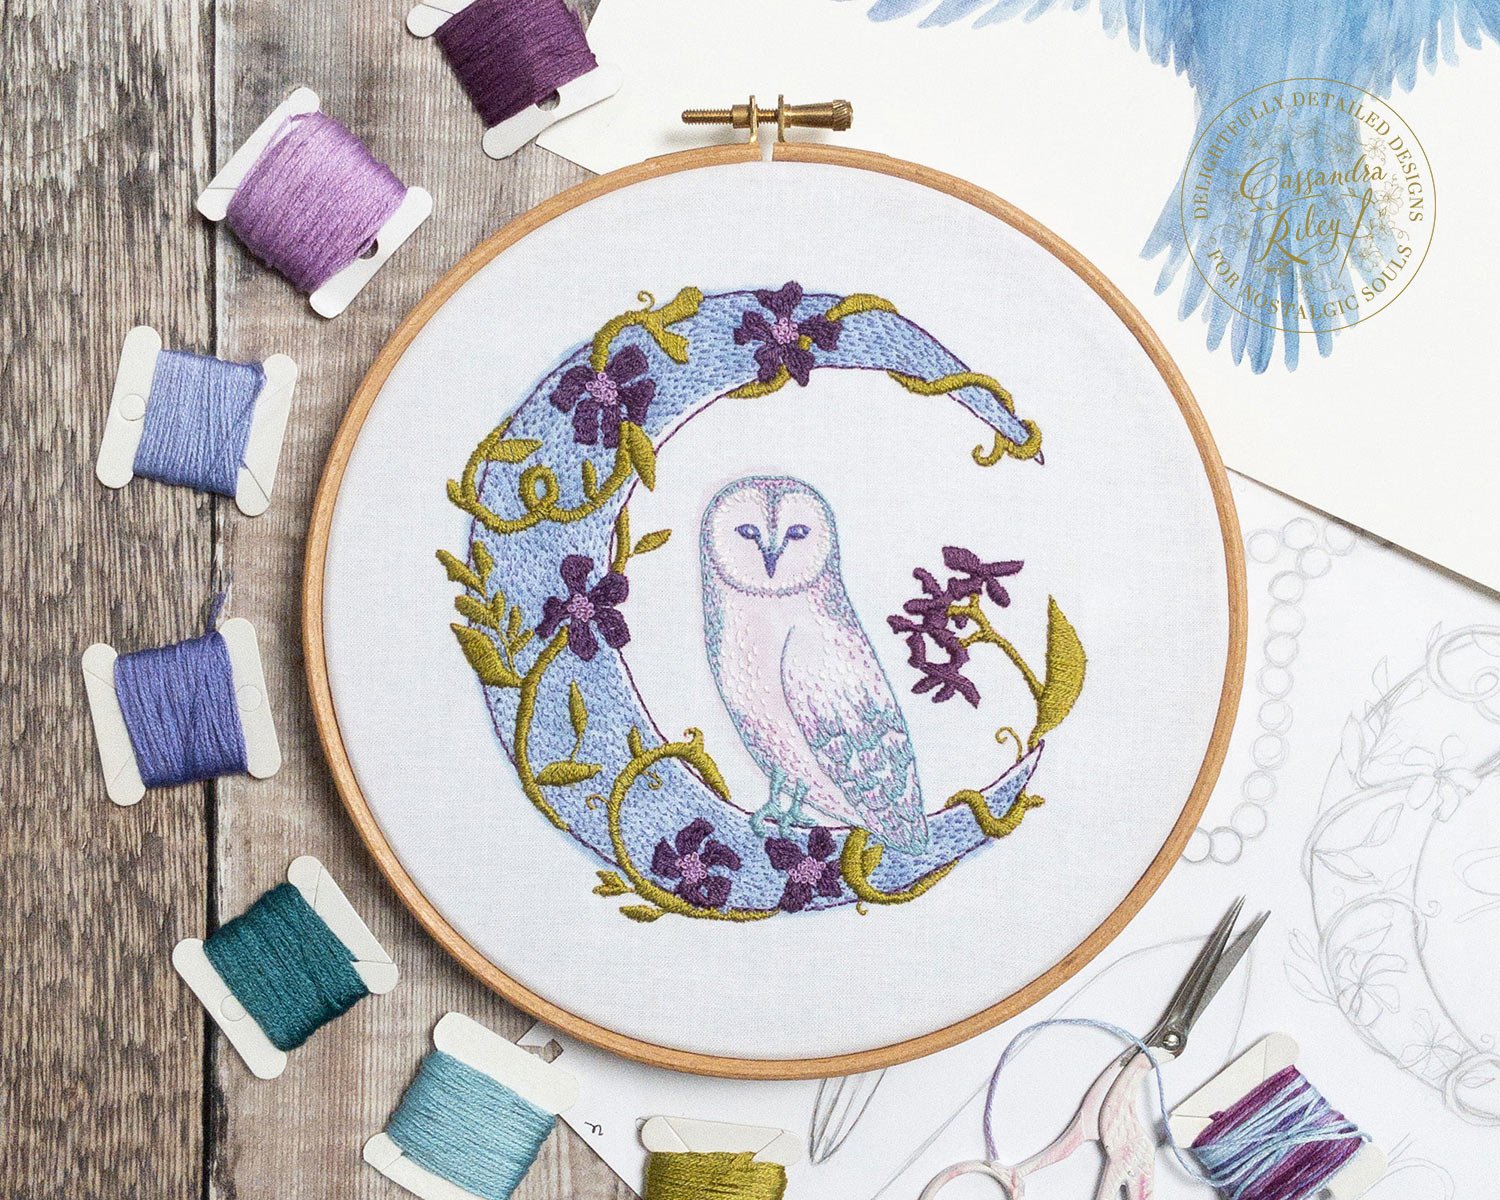 Is there a dye pen I could use to color over the embroidery?